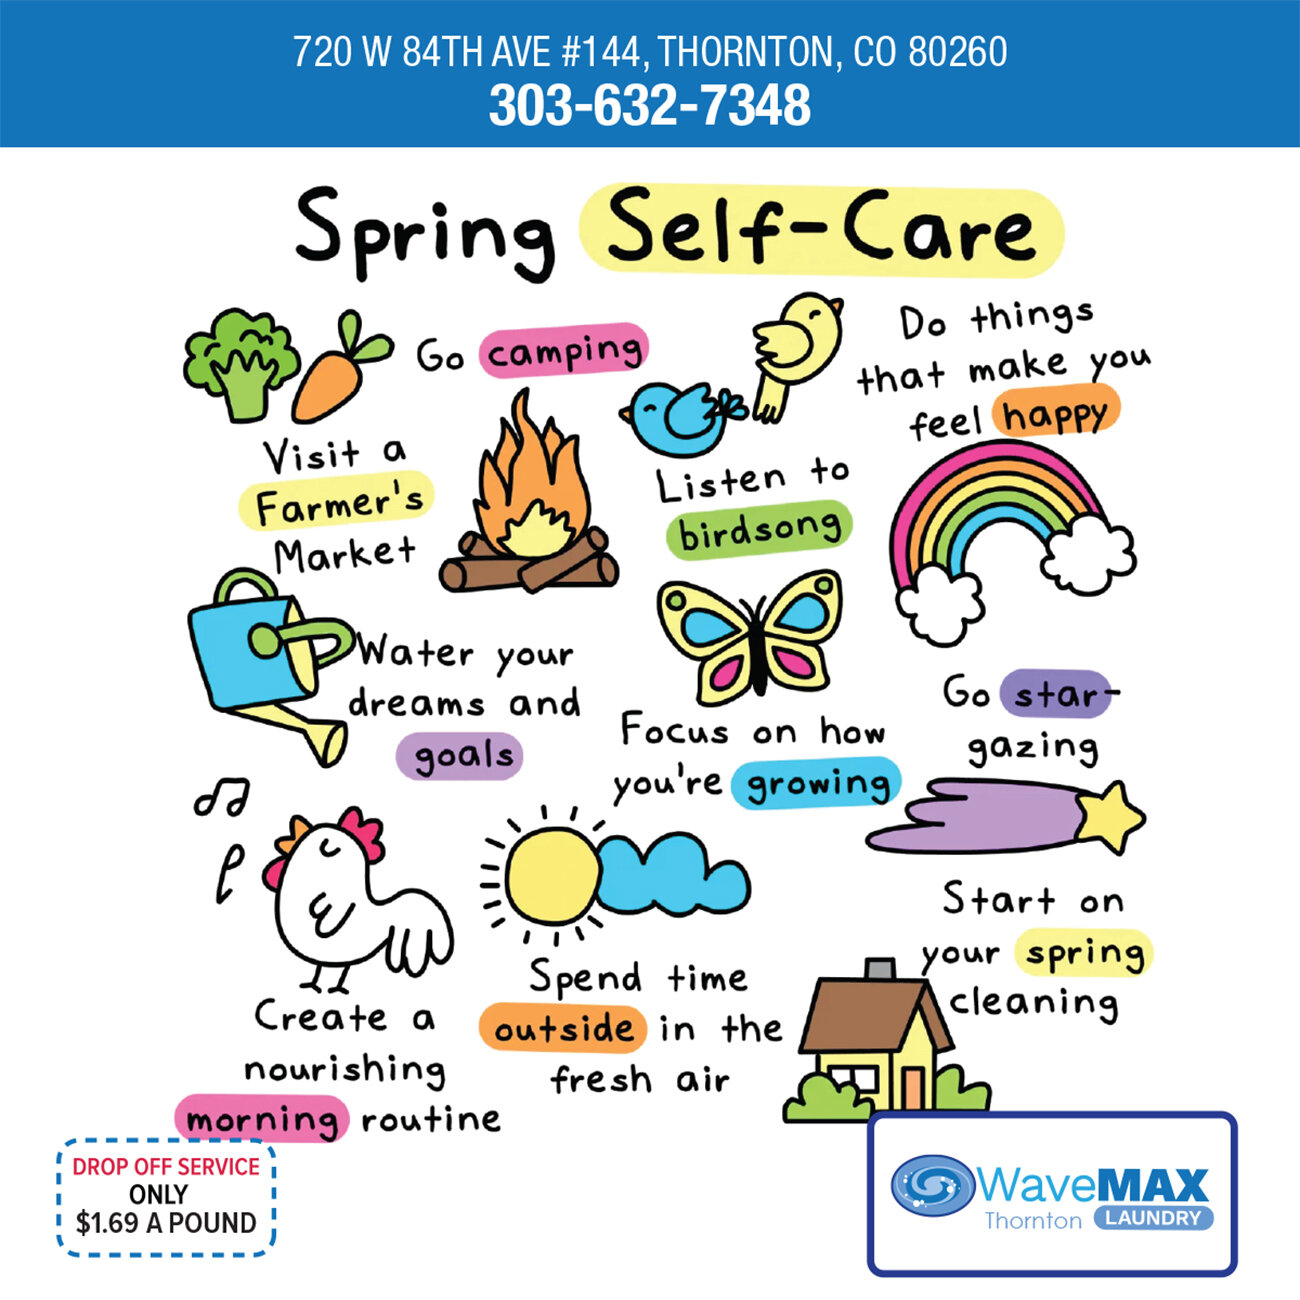 With so many Spring activities to do, self care can fall to the back burner. Here are some ideas for Spring self care.